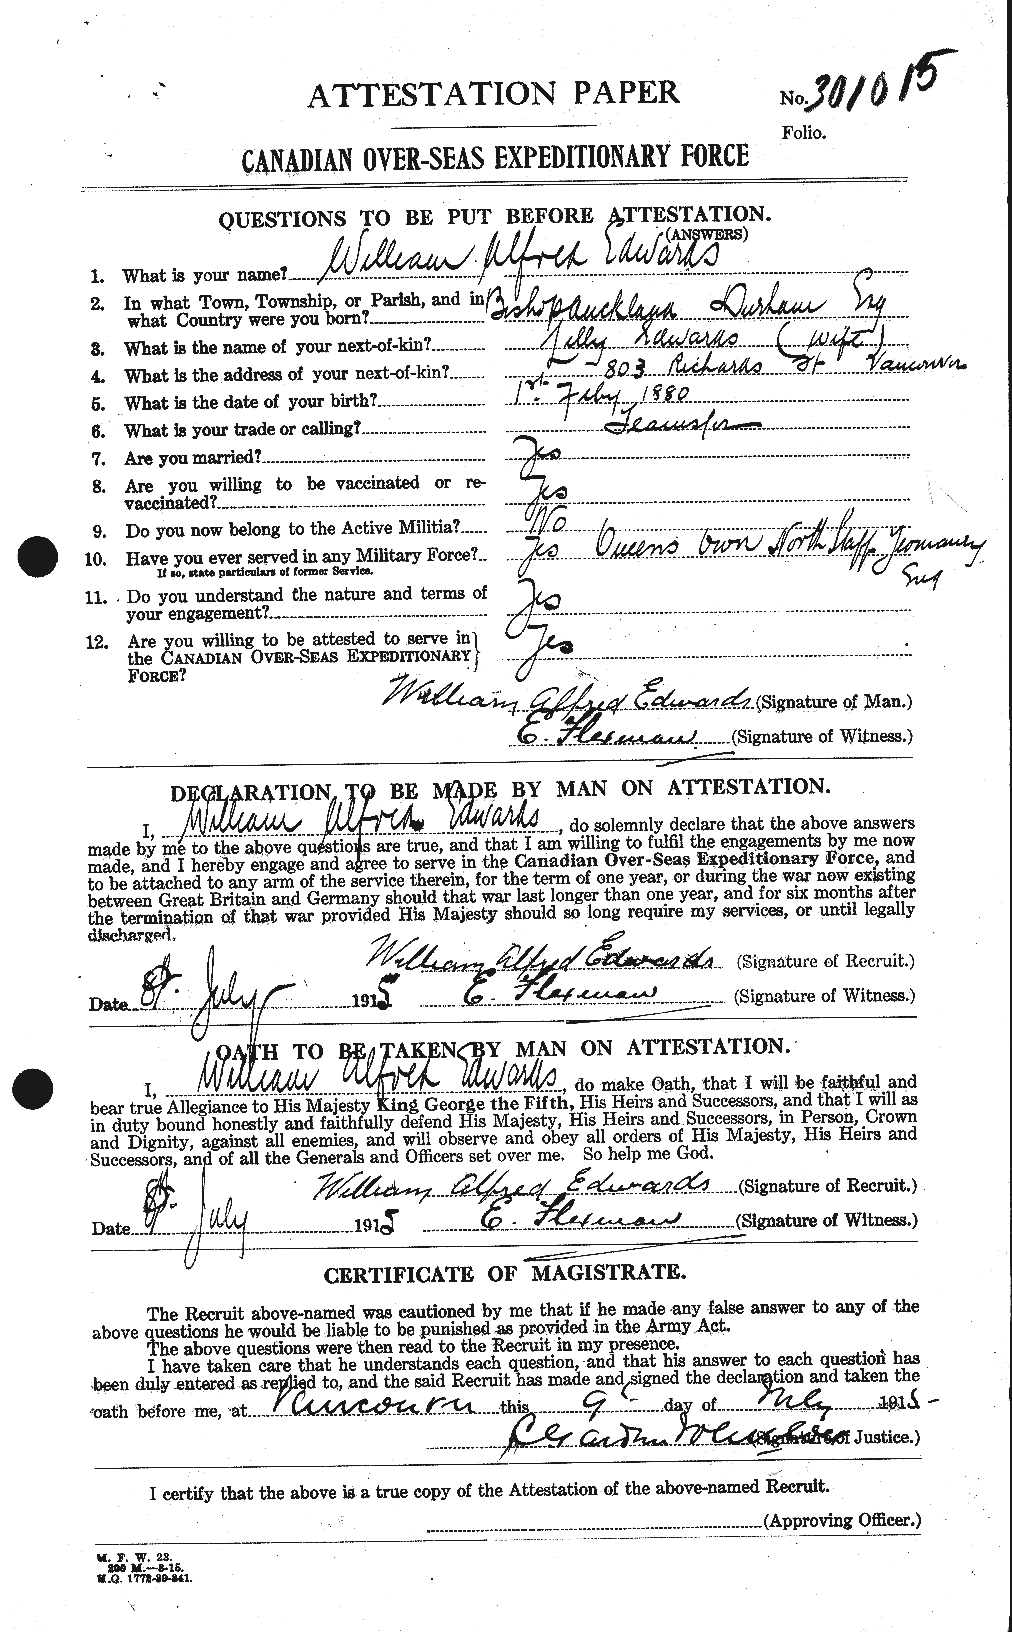 Personnel Records of the First World War - CEF 310410a